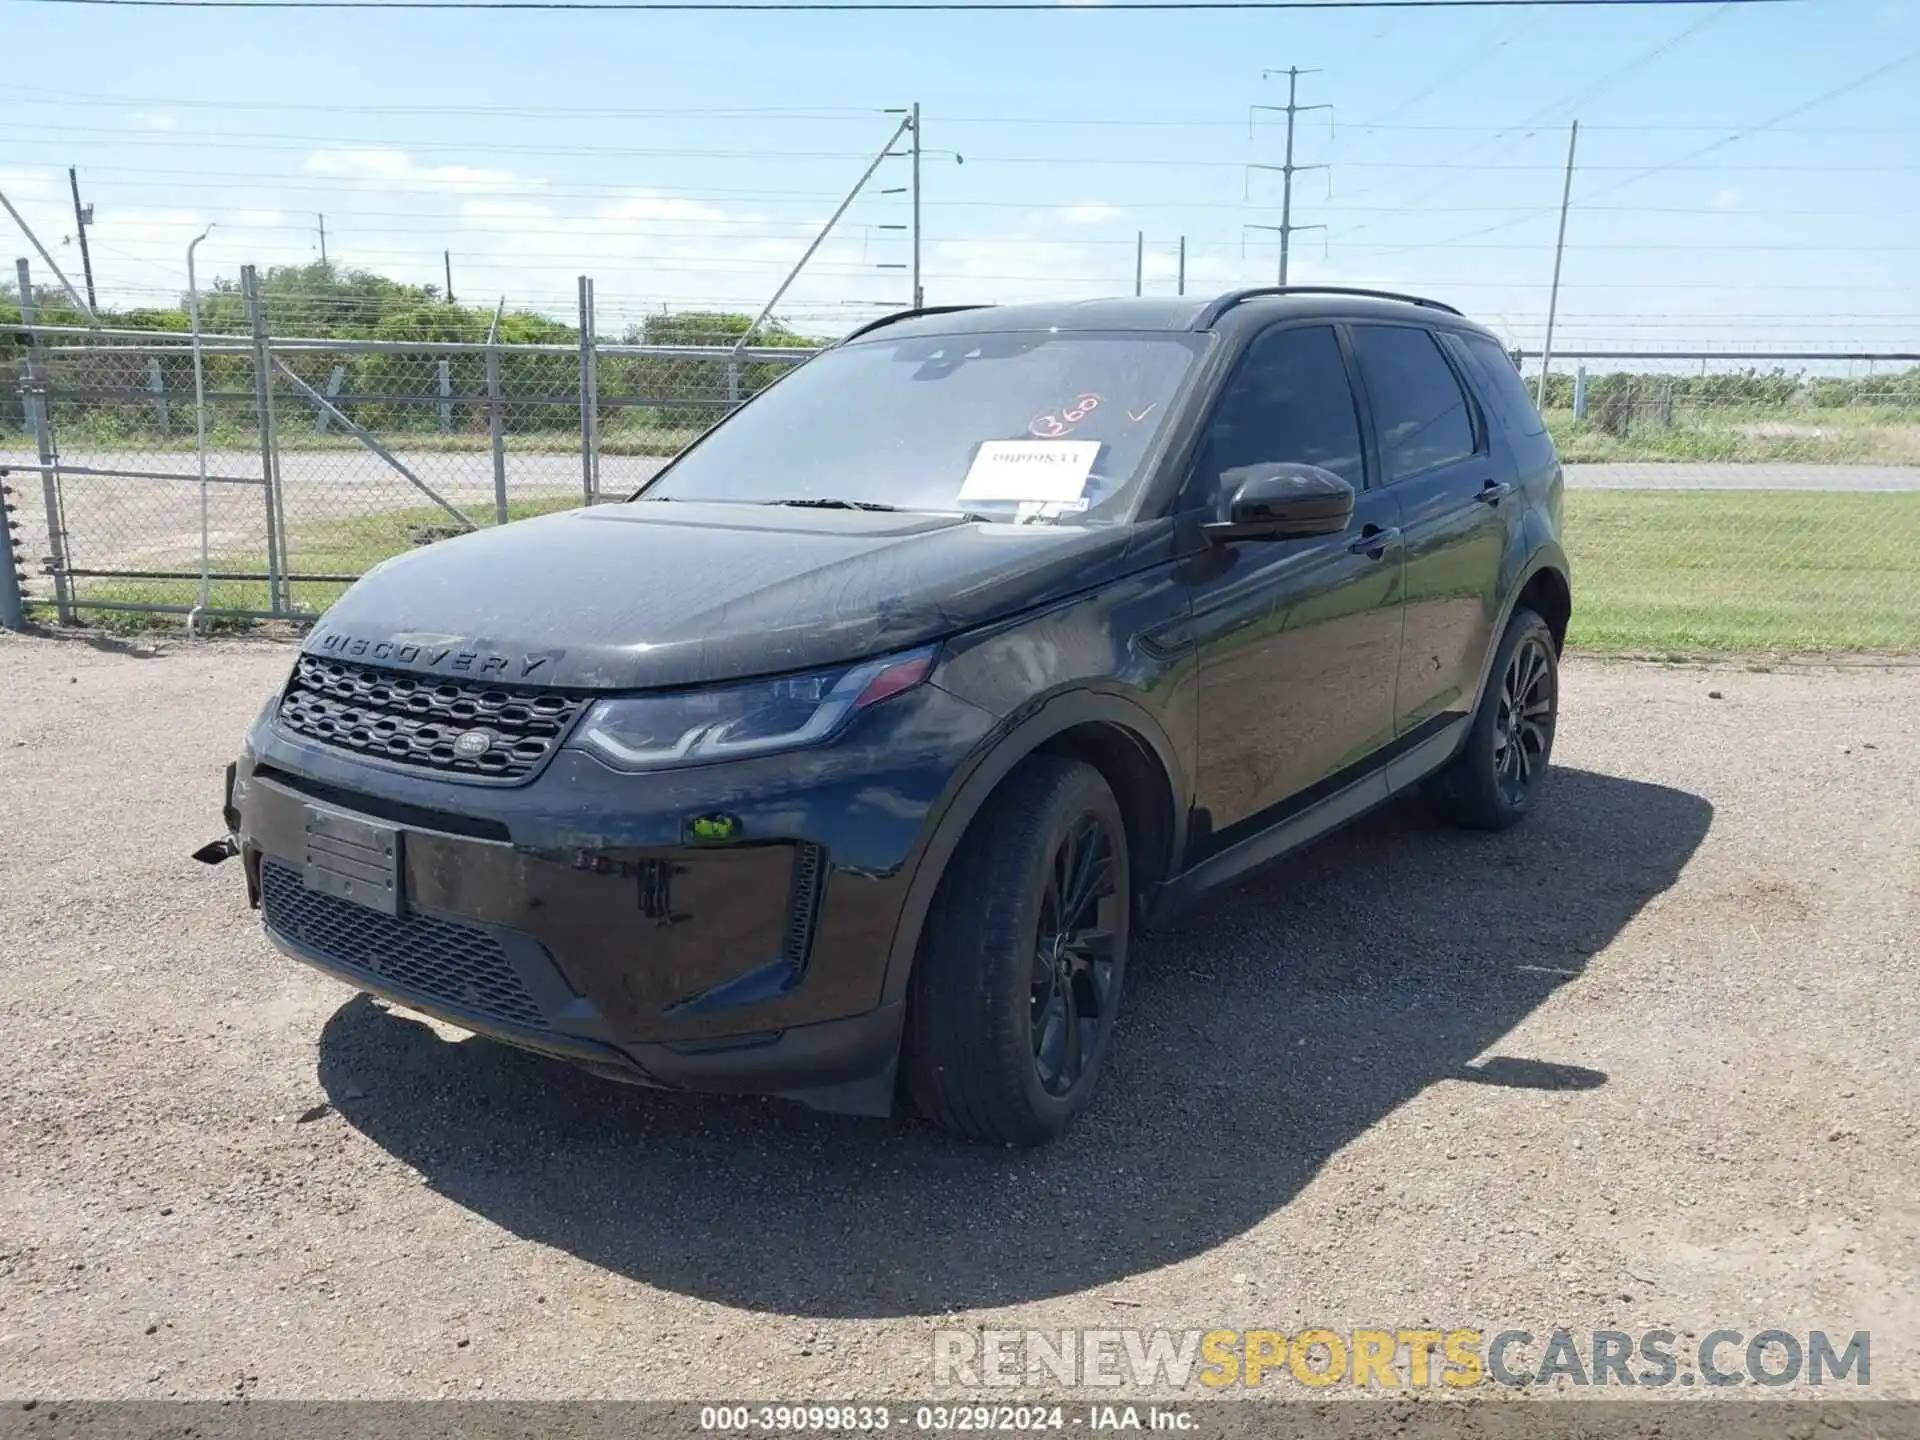 2 Photograph of a damaged car SALCP2FX7LH851493 LAND ROVER DISCOVERY SPORT 2020